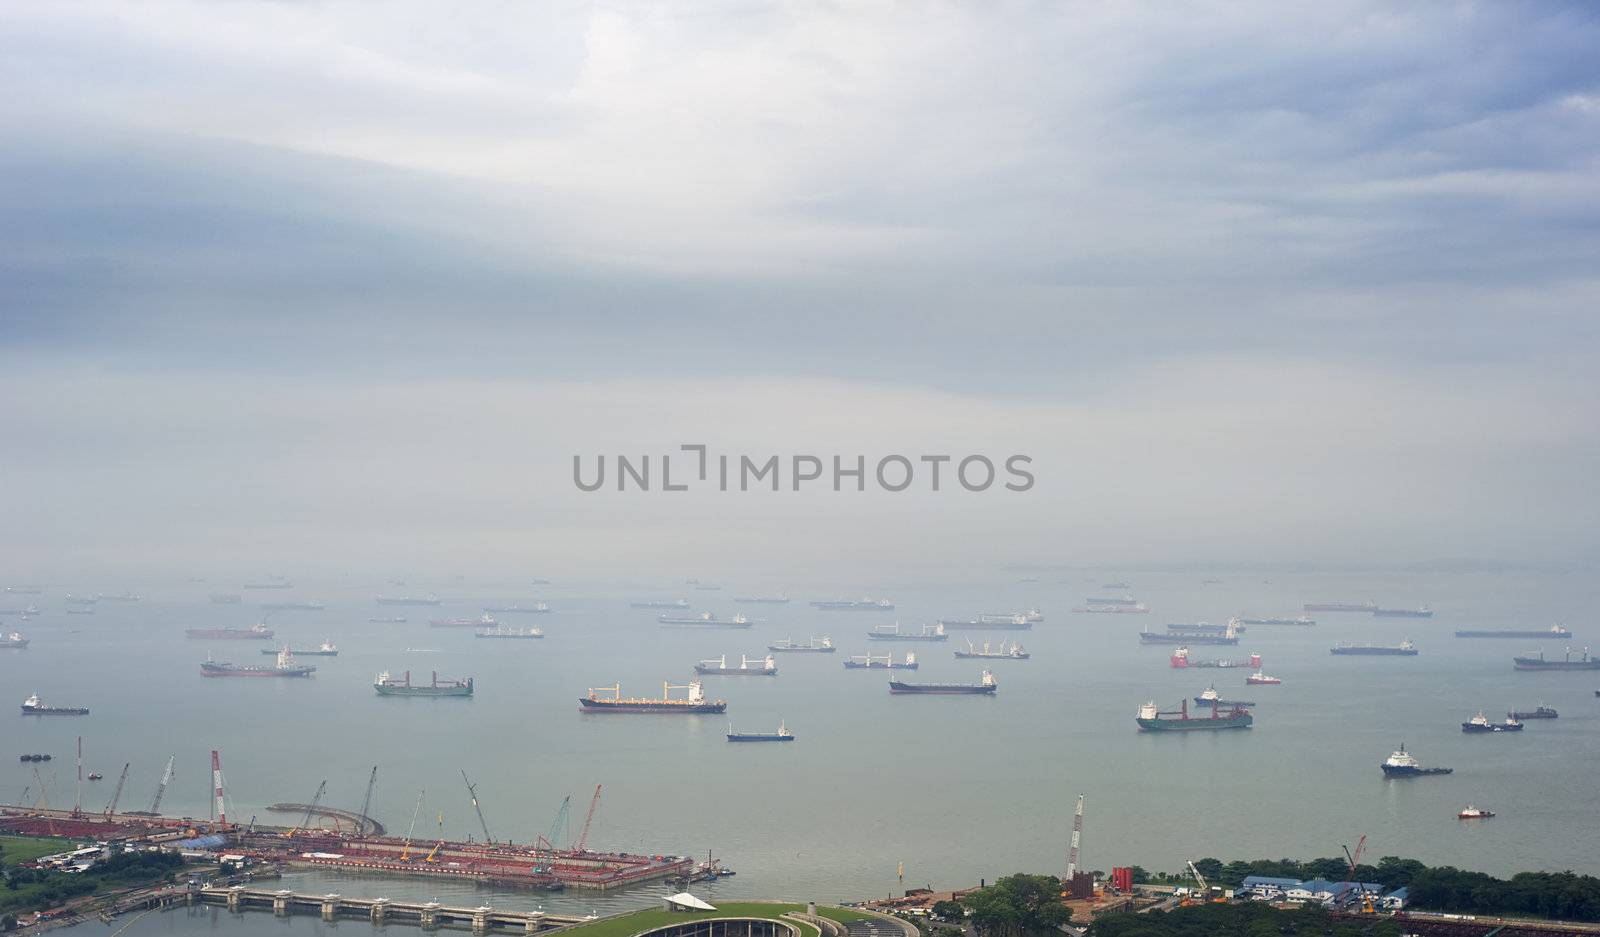 A lot of ships near the Singapore harbor